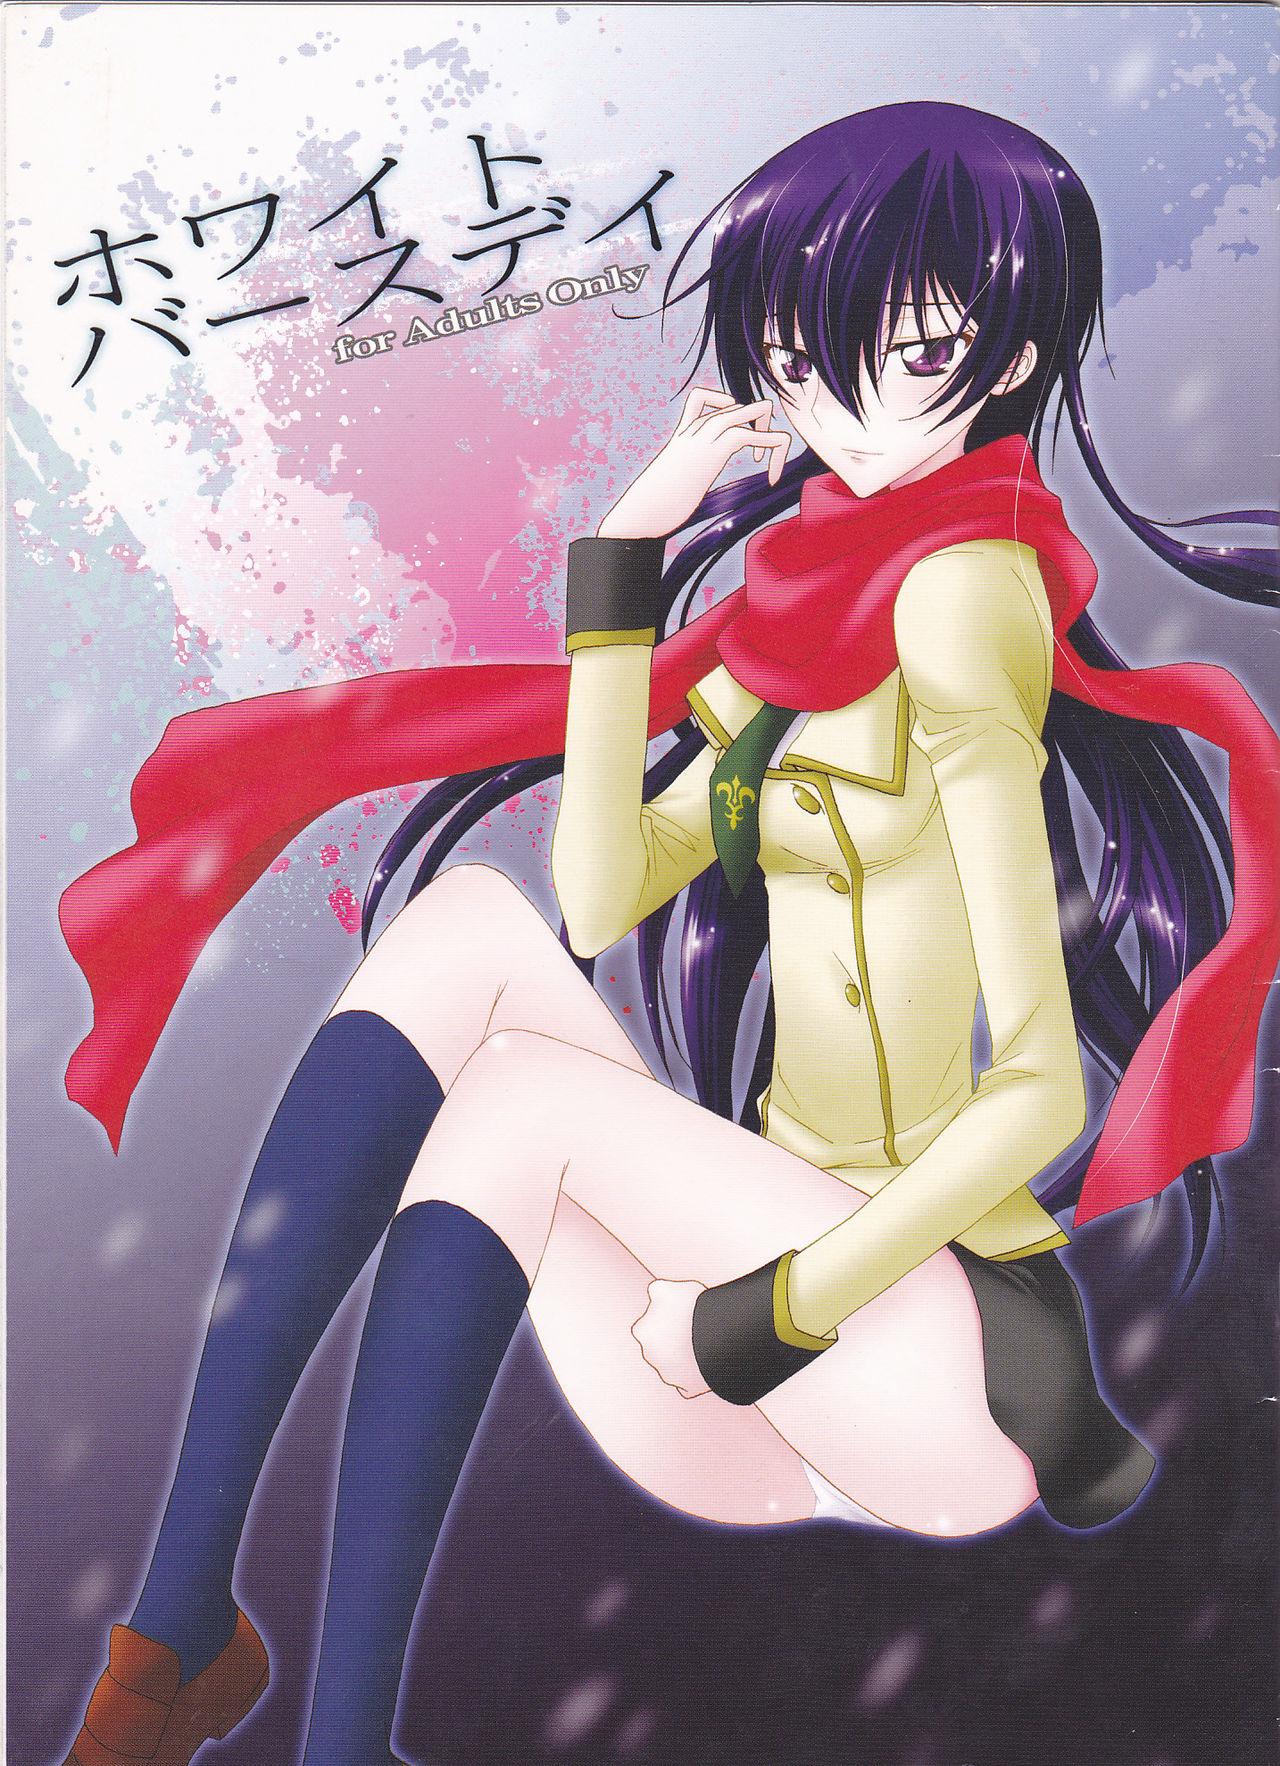 Hot White Birthday - Code geass Live - Picture 1